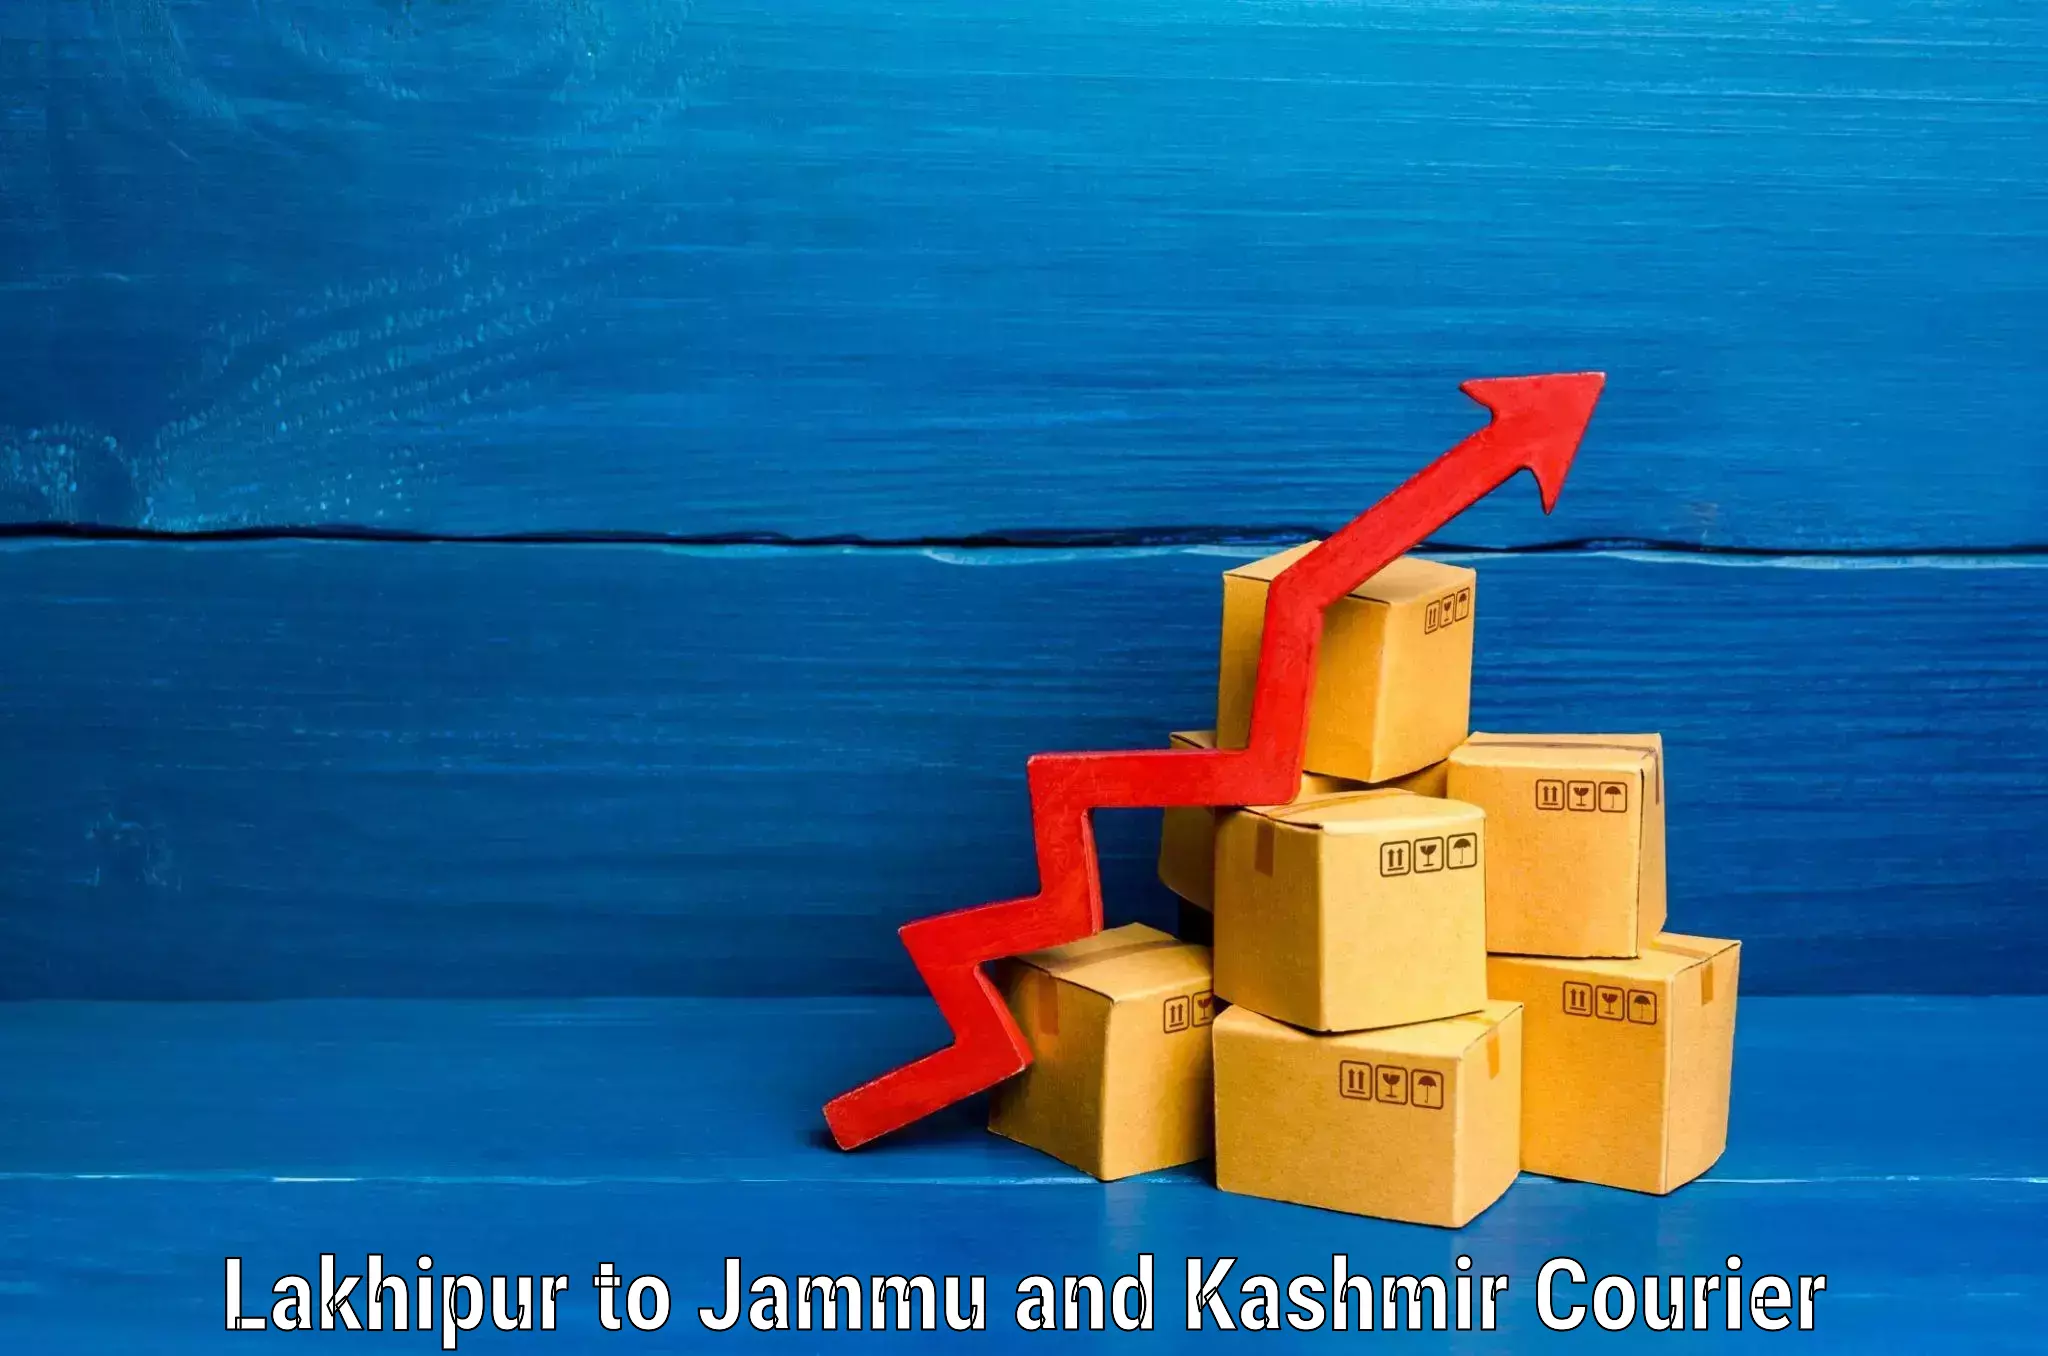 Luggage shipment specialists Lakhipur to Jammu and Kashmir